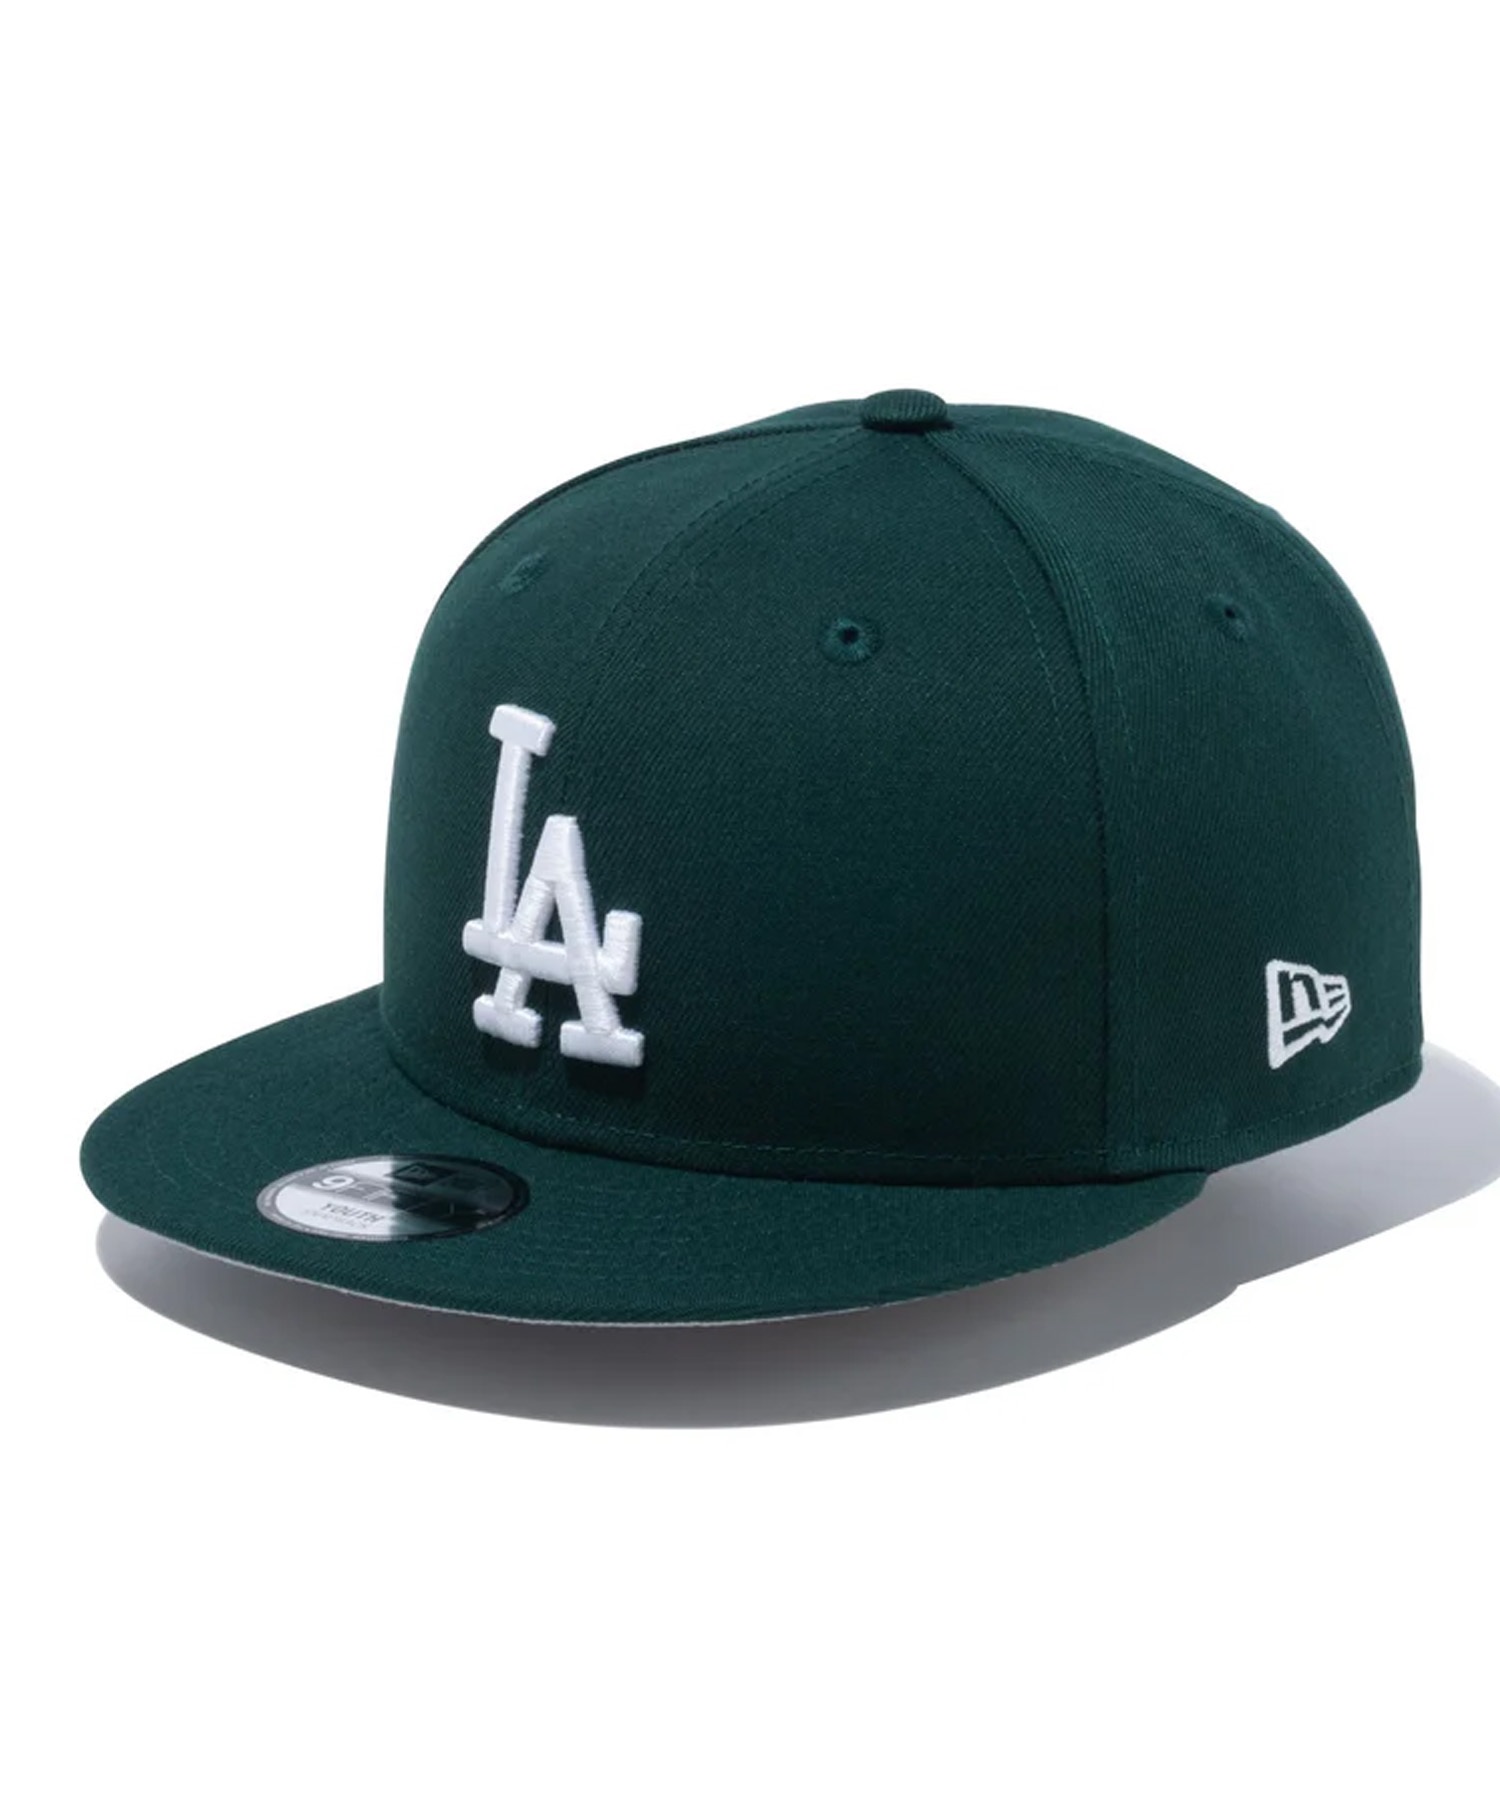 NEW ERA ニューエラ Youth 9FIFTY MLB State Flowers ロサンゼルス・ドジャース ダークグリーン キッズ キャップ 帽子 14111893(ONECOLOR-YTH)